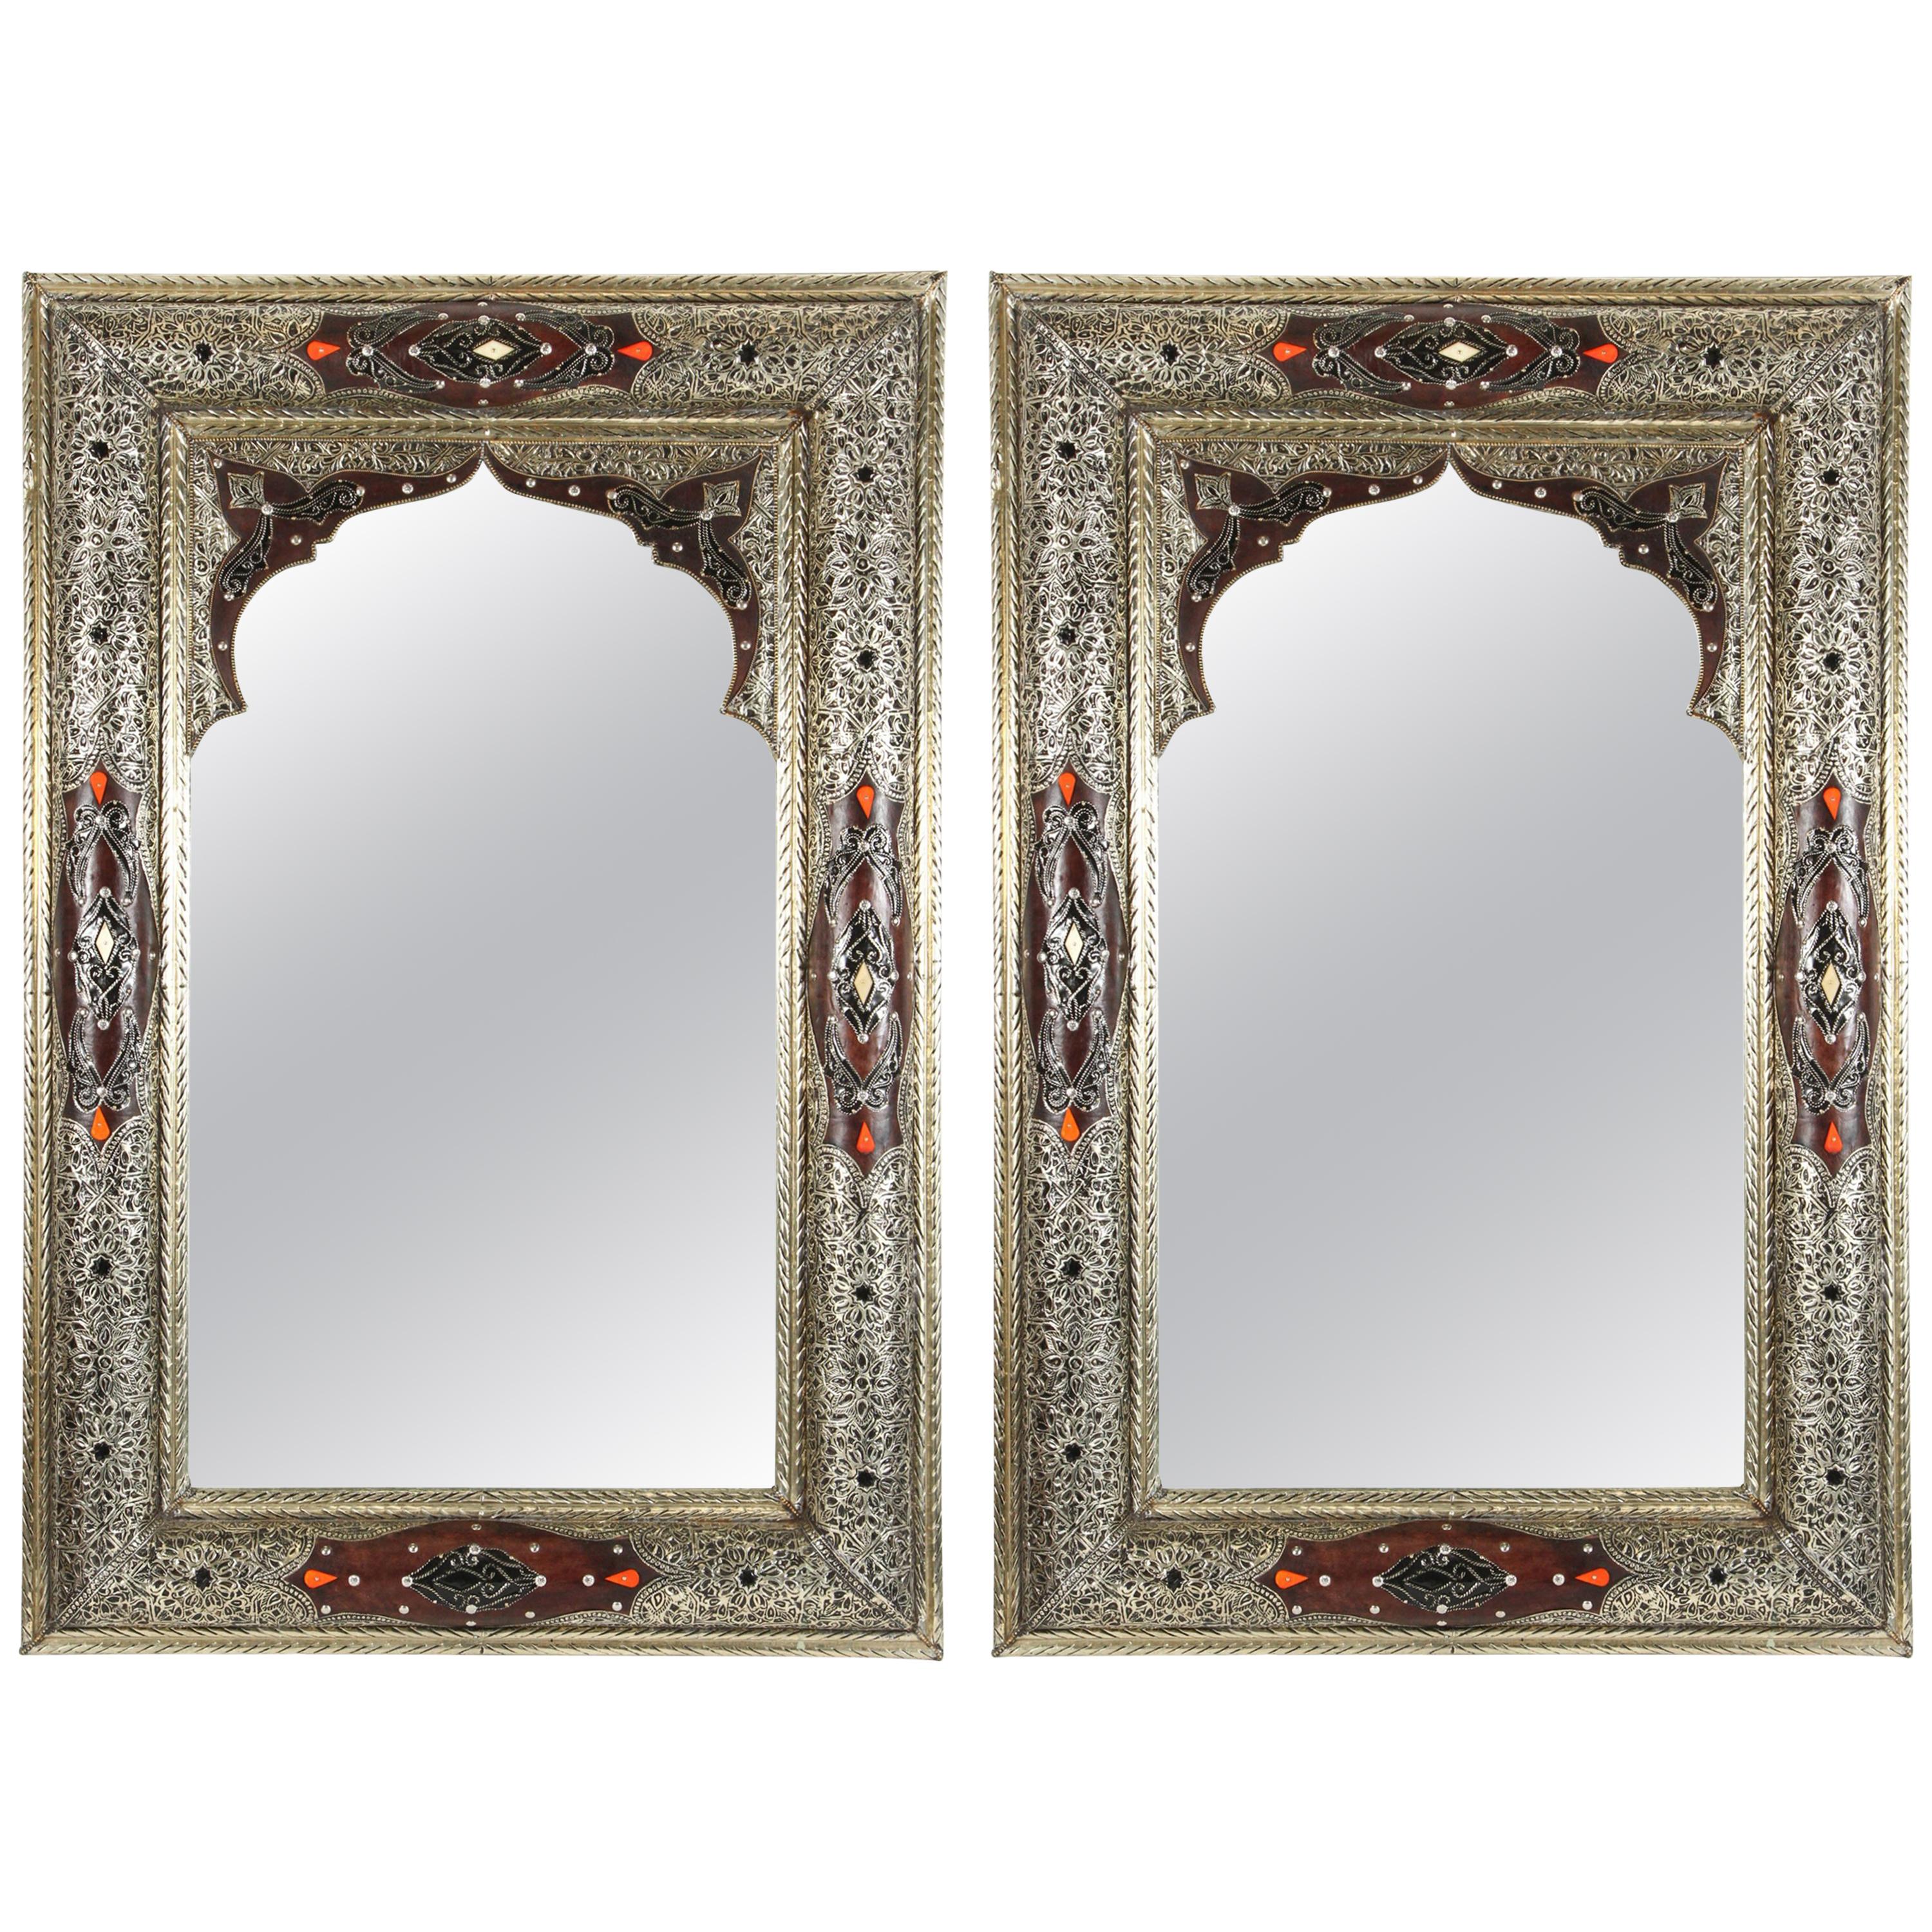 Pair of Moroccan Mirrors with Silvered Metal and Leather Wrapped